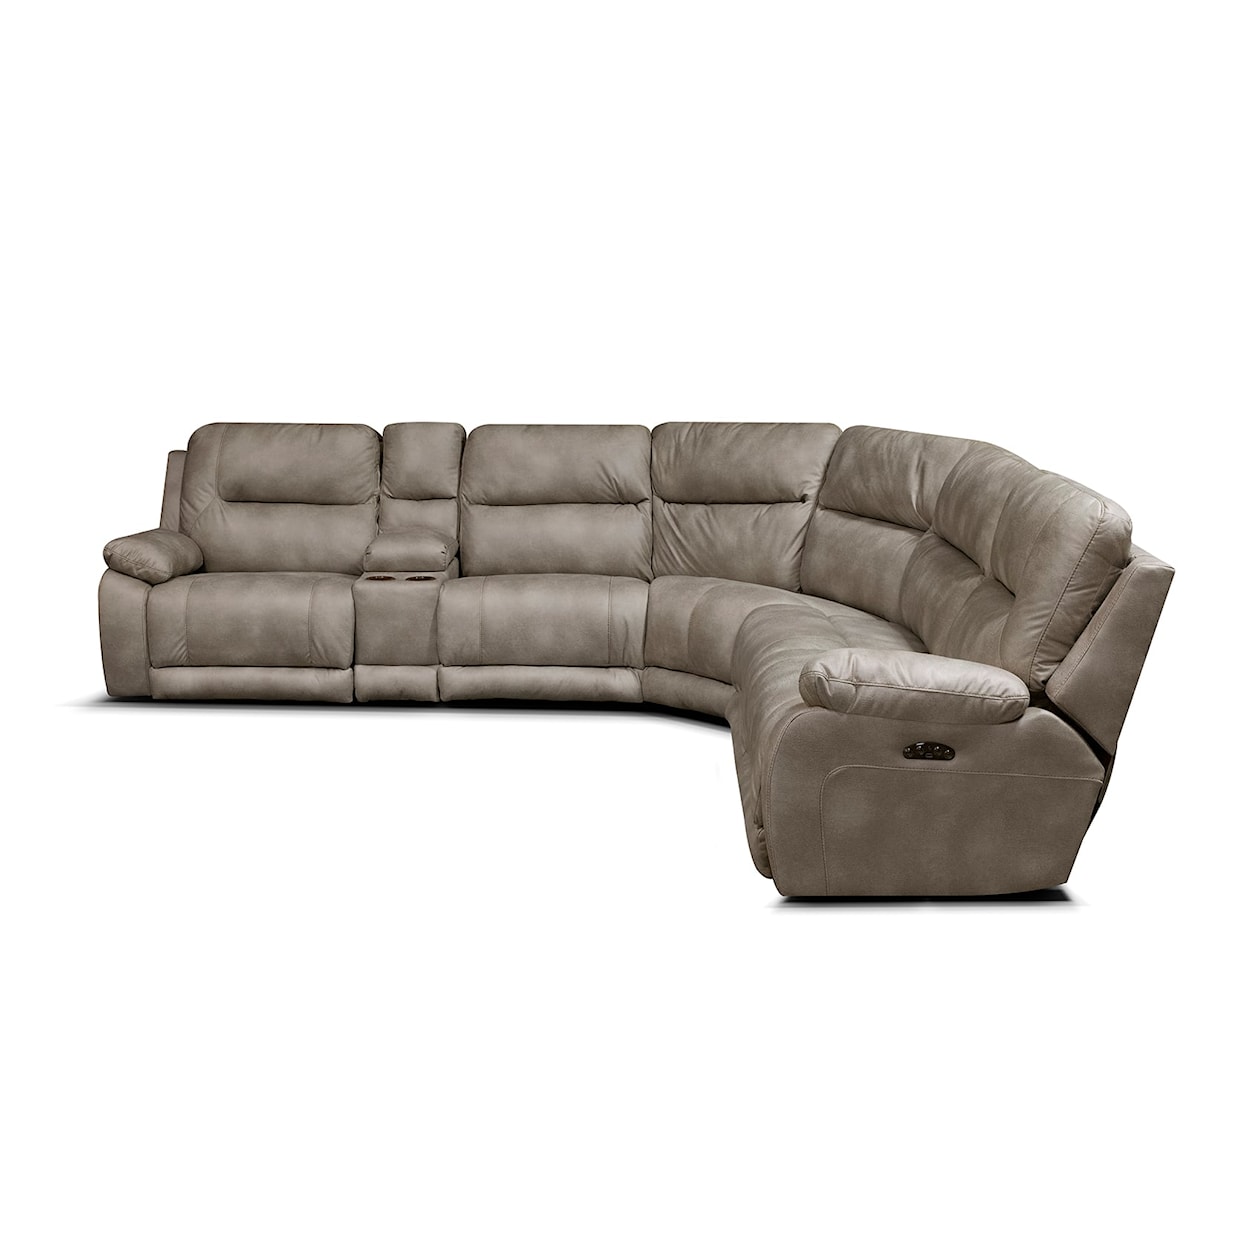 Tennessee Custom Upholstery EZ9K00/H Series 6-Piece Sectional Sofa with Power Headrest